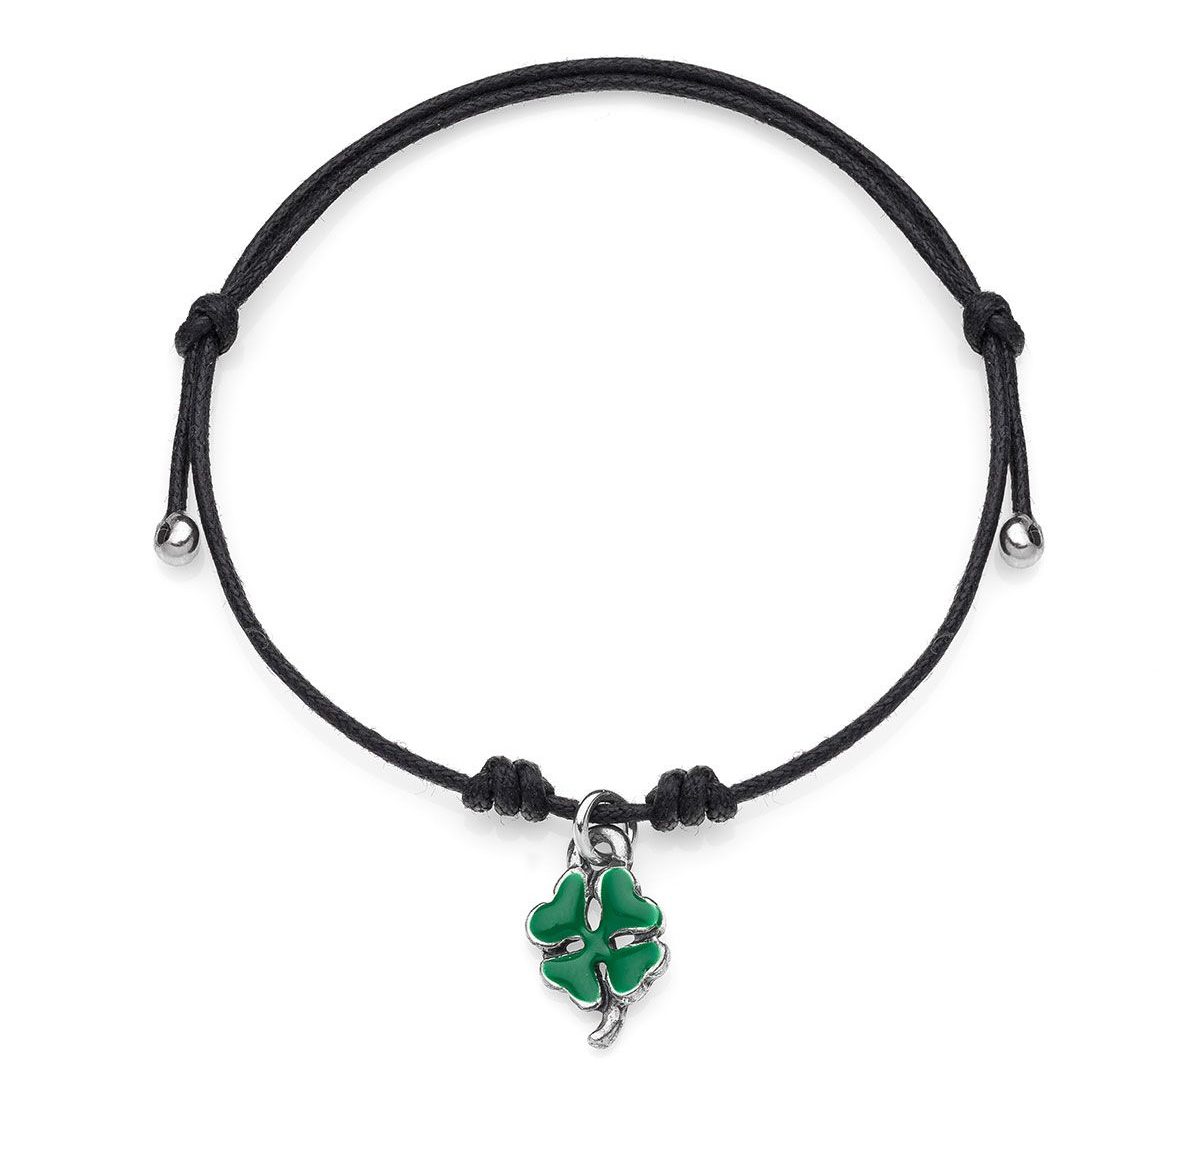 Mini Black Cotton Cord Bracelet with Mini Four-Leaf Clover Charm in  Sterling Silver and Enamel